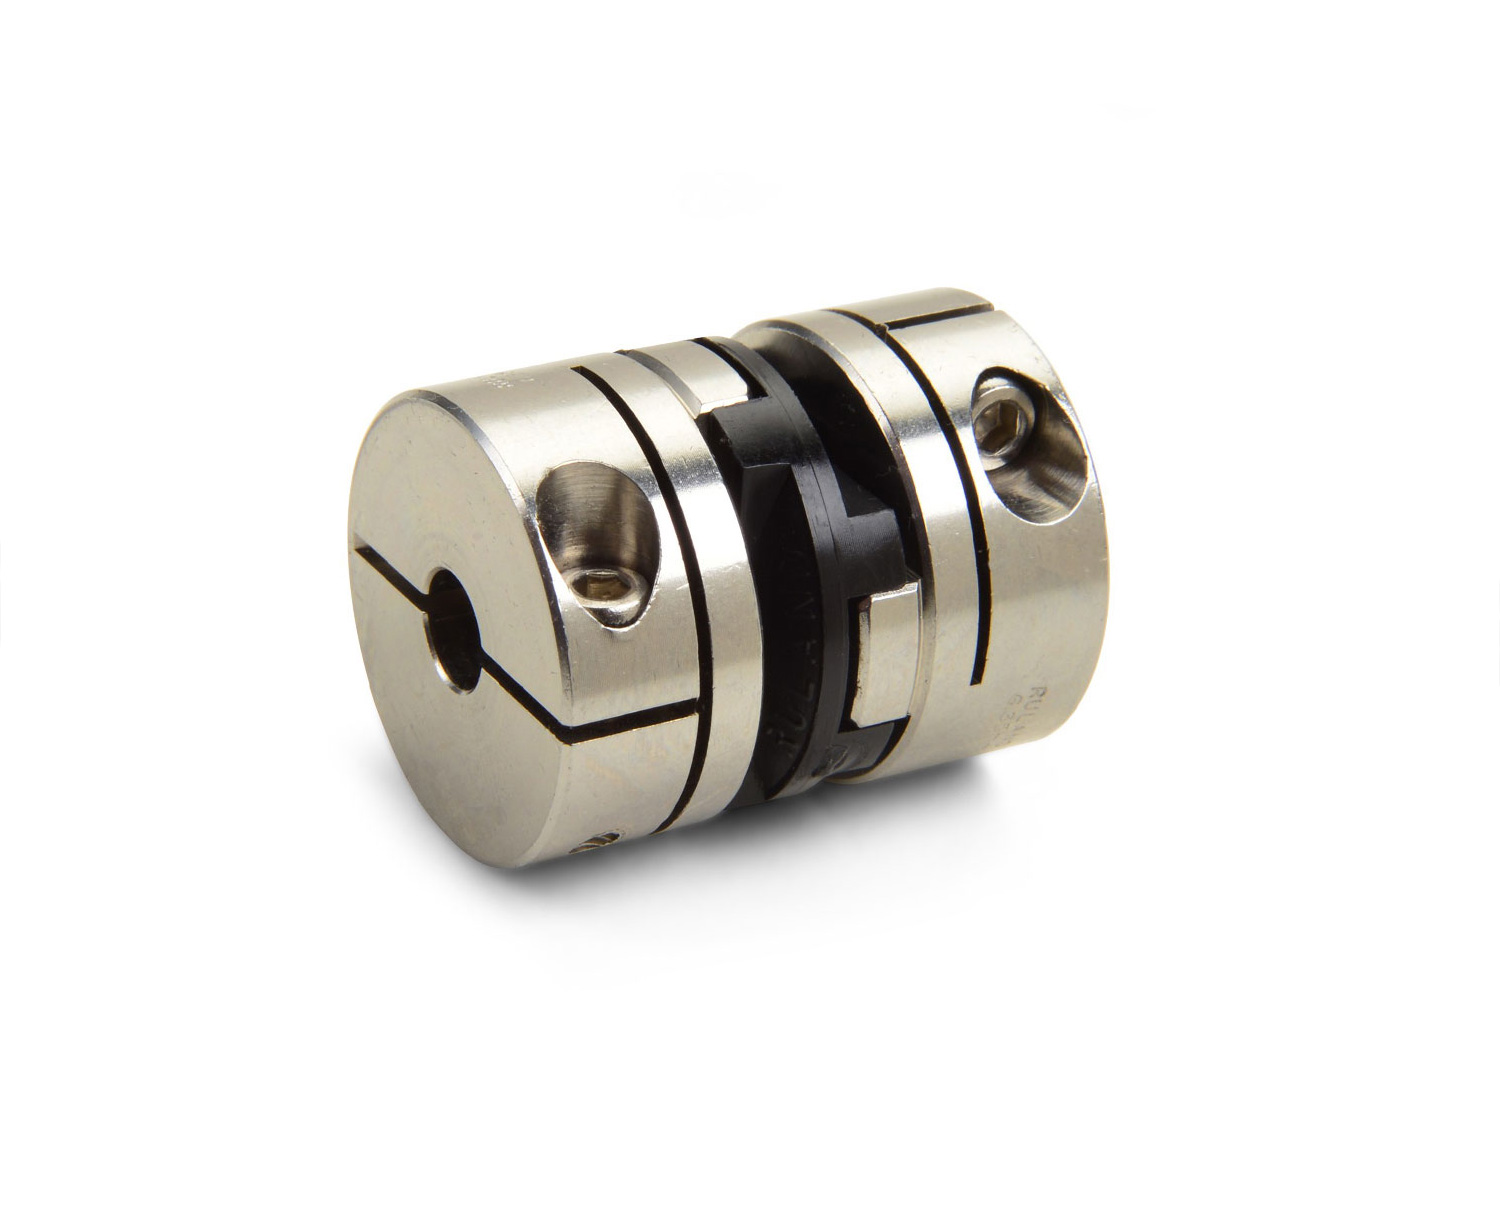 Stainless steel oldham couplings are well suited for food and beverage equipment with high temperatures or caustic washdowns